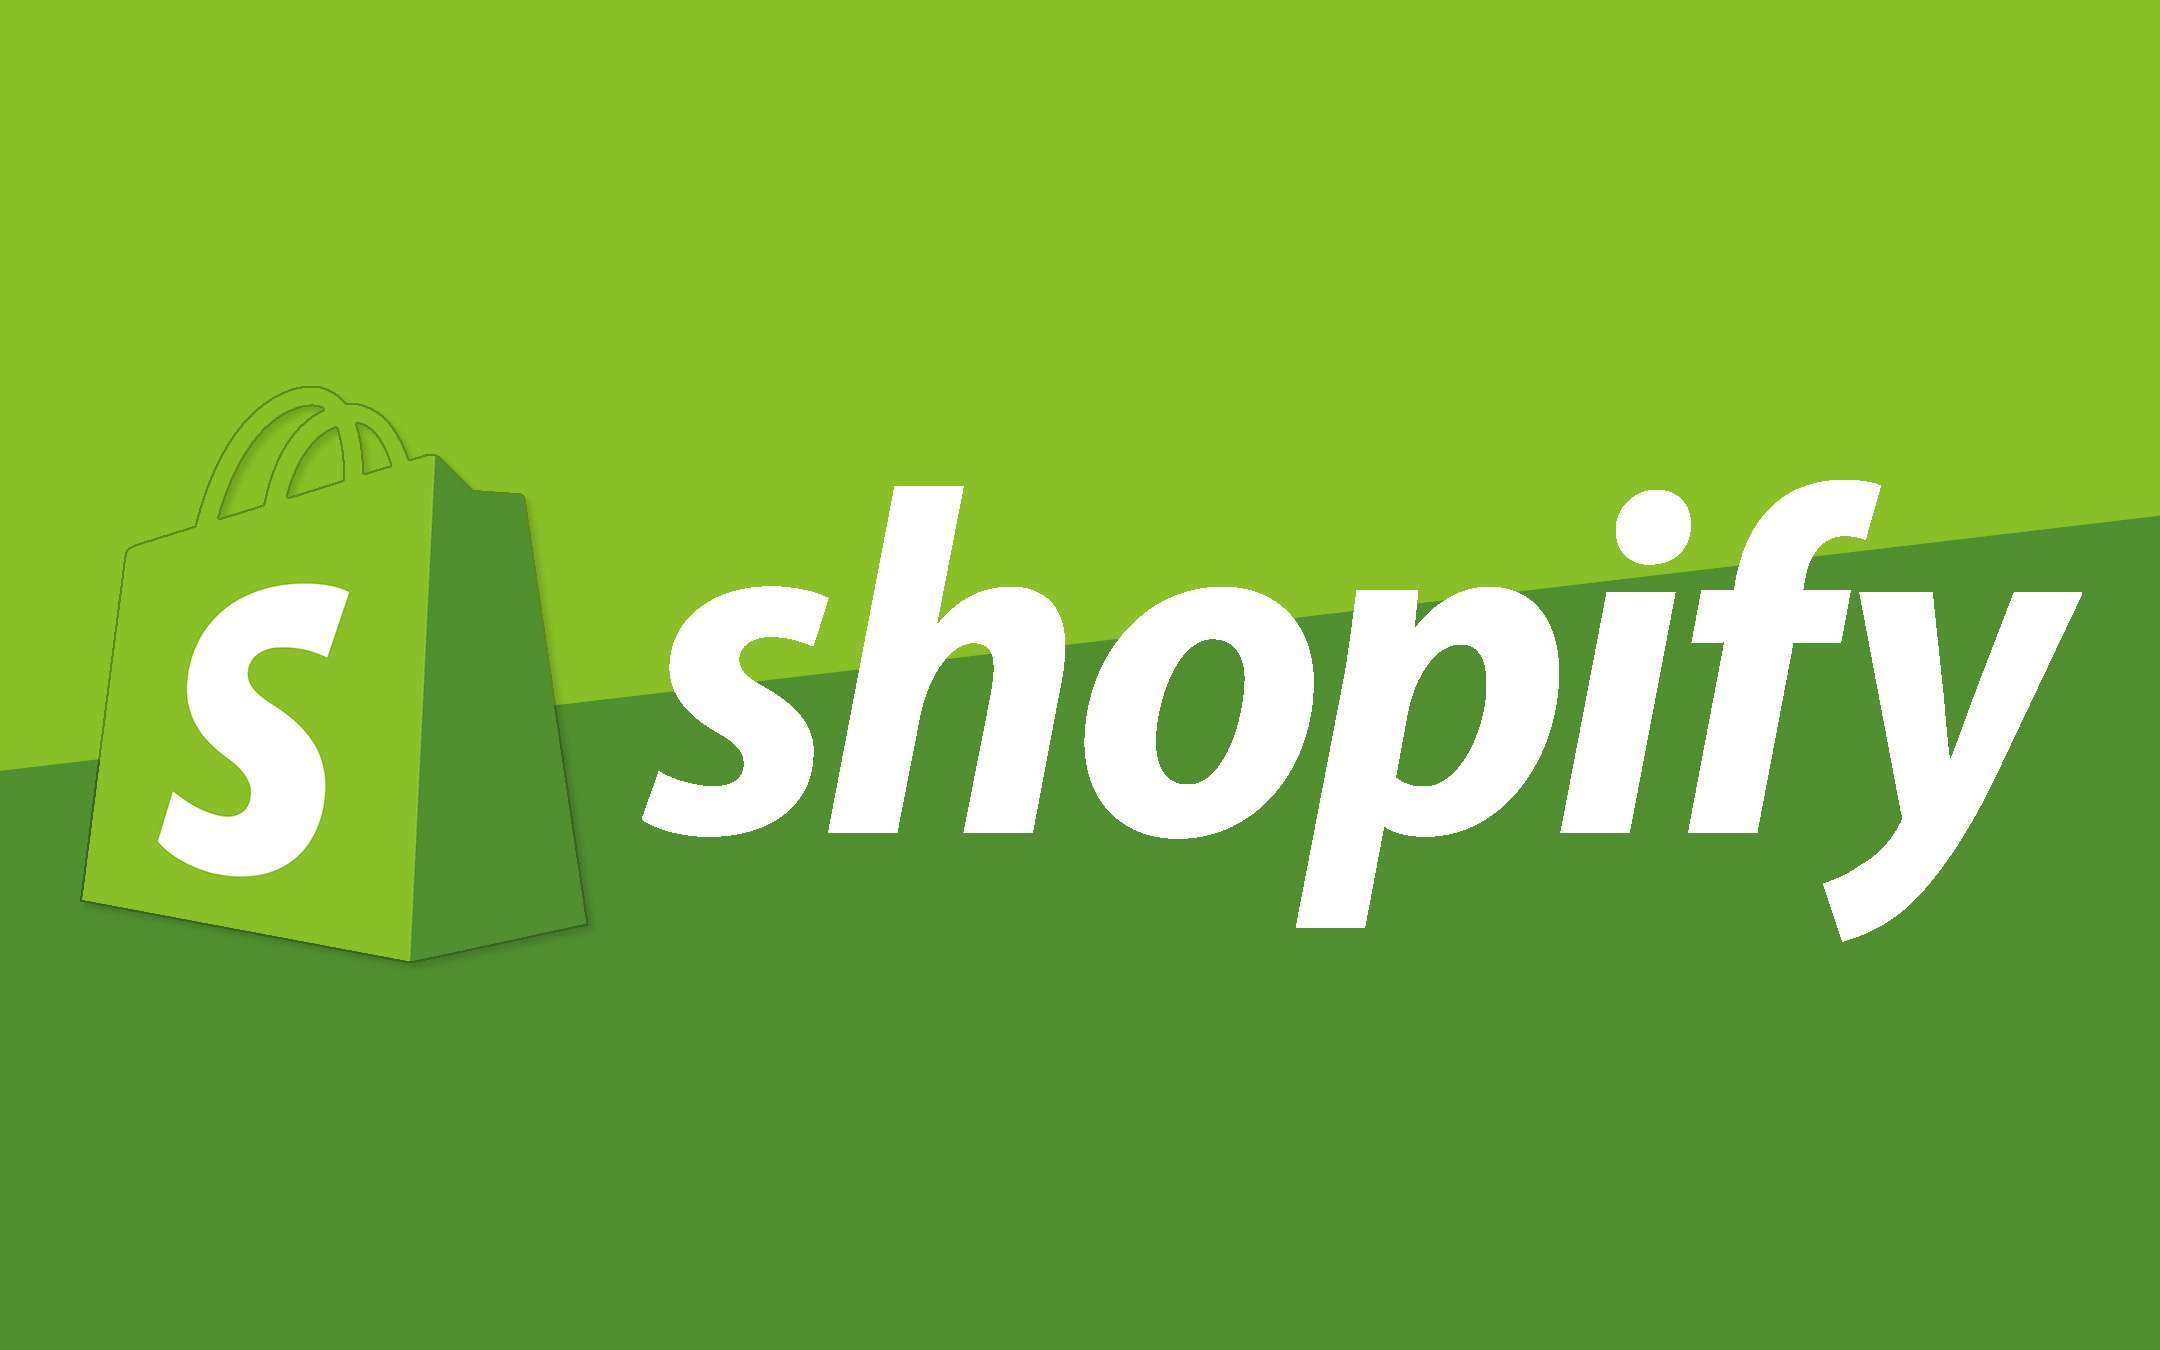 Is there a Shopify danger?